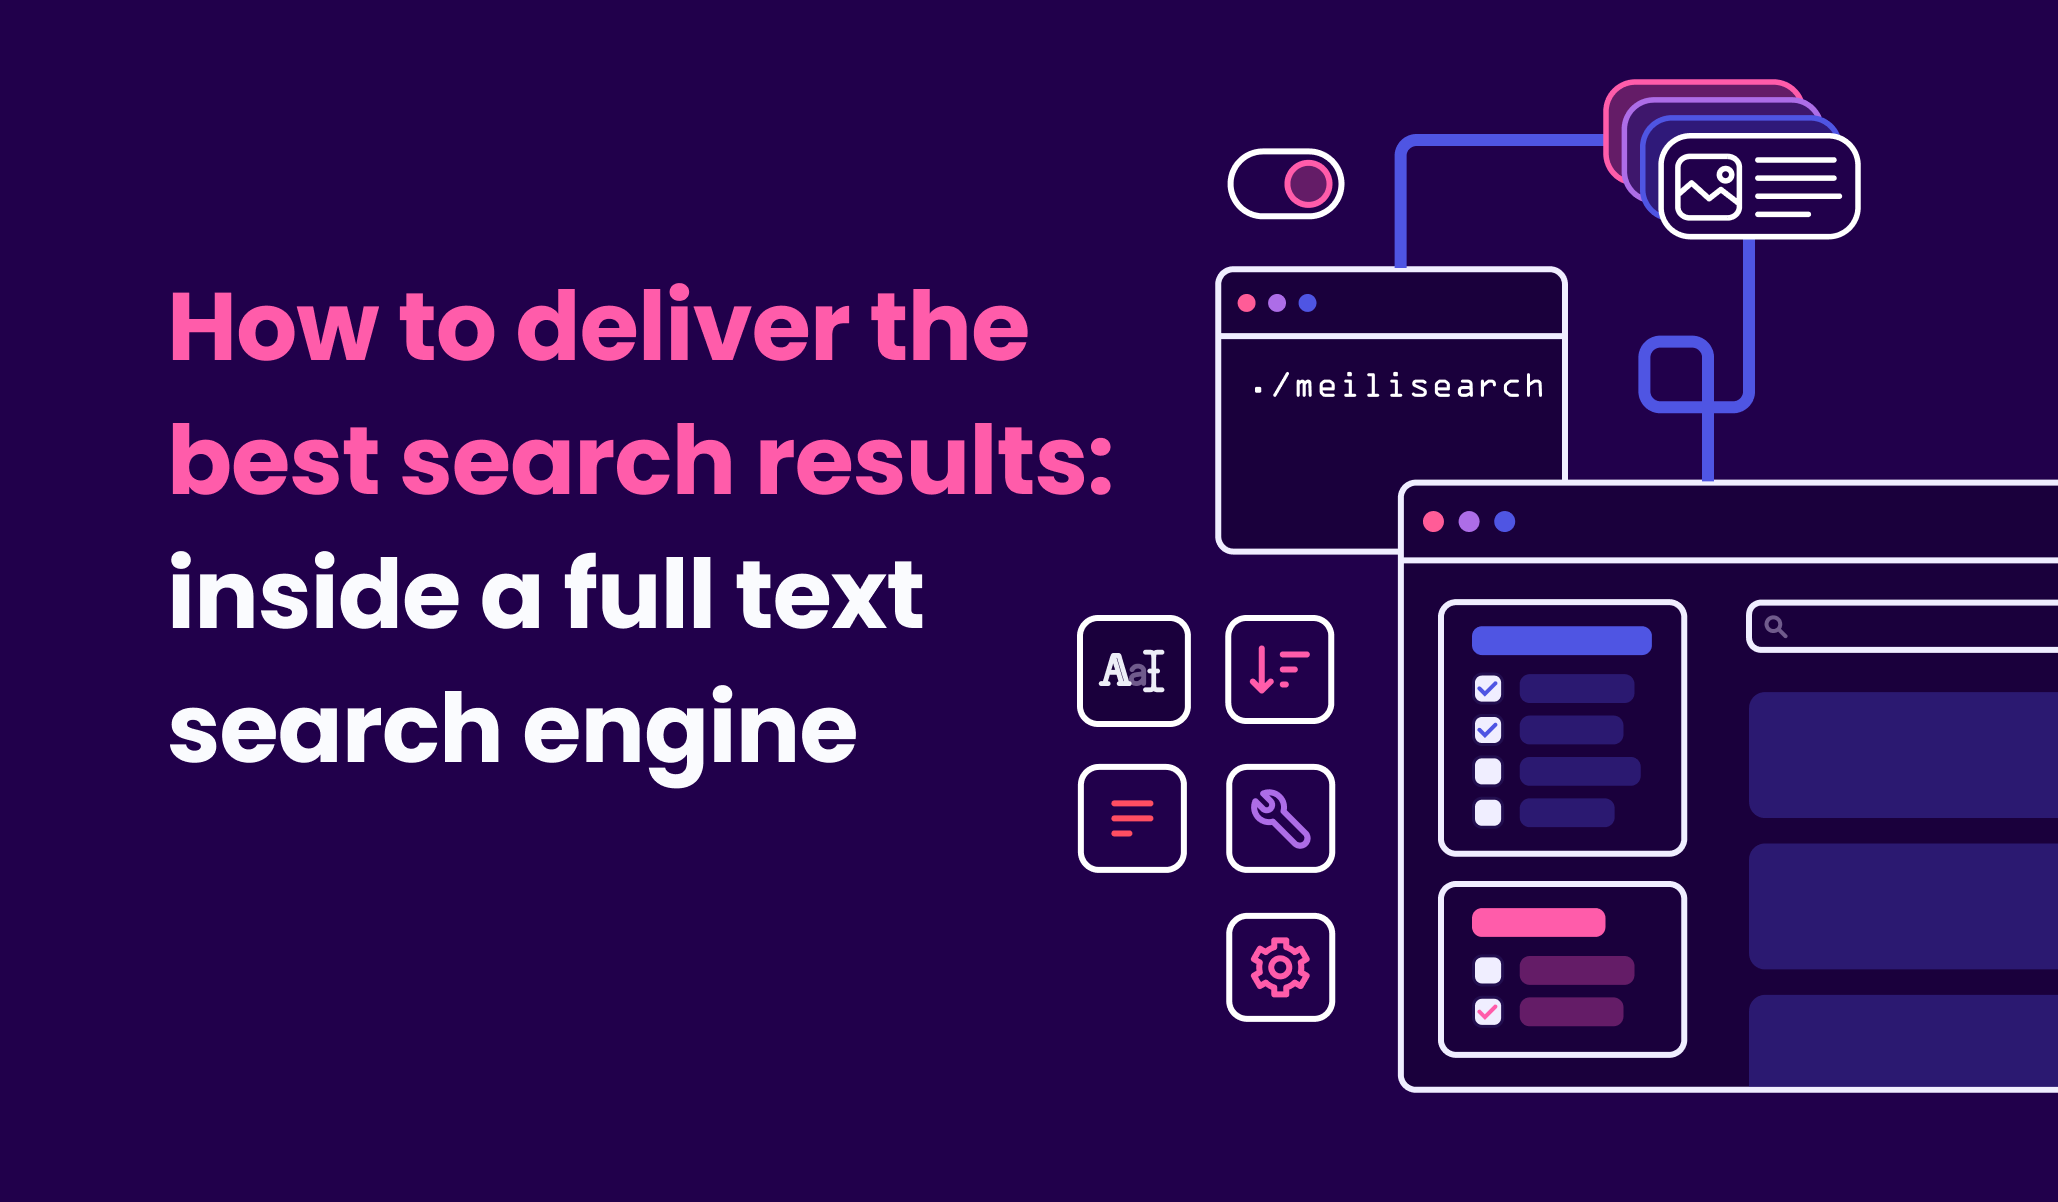 How to deliver the best search results: inside a full text search engine